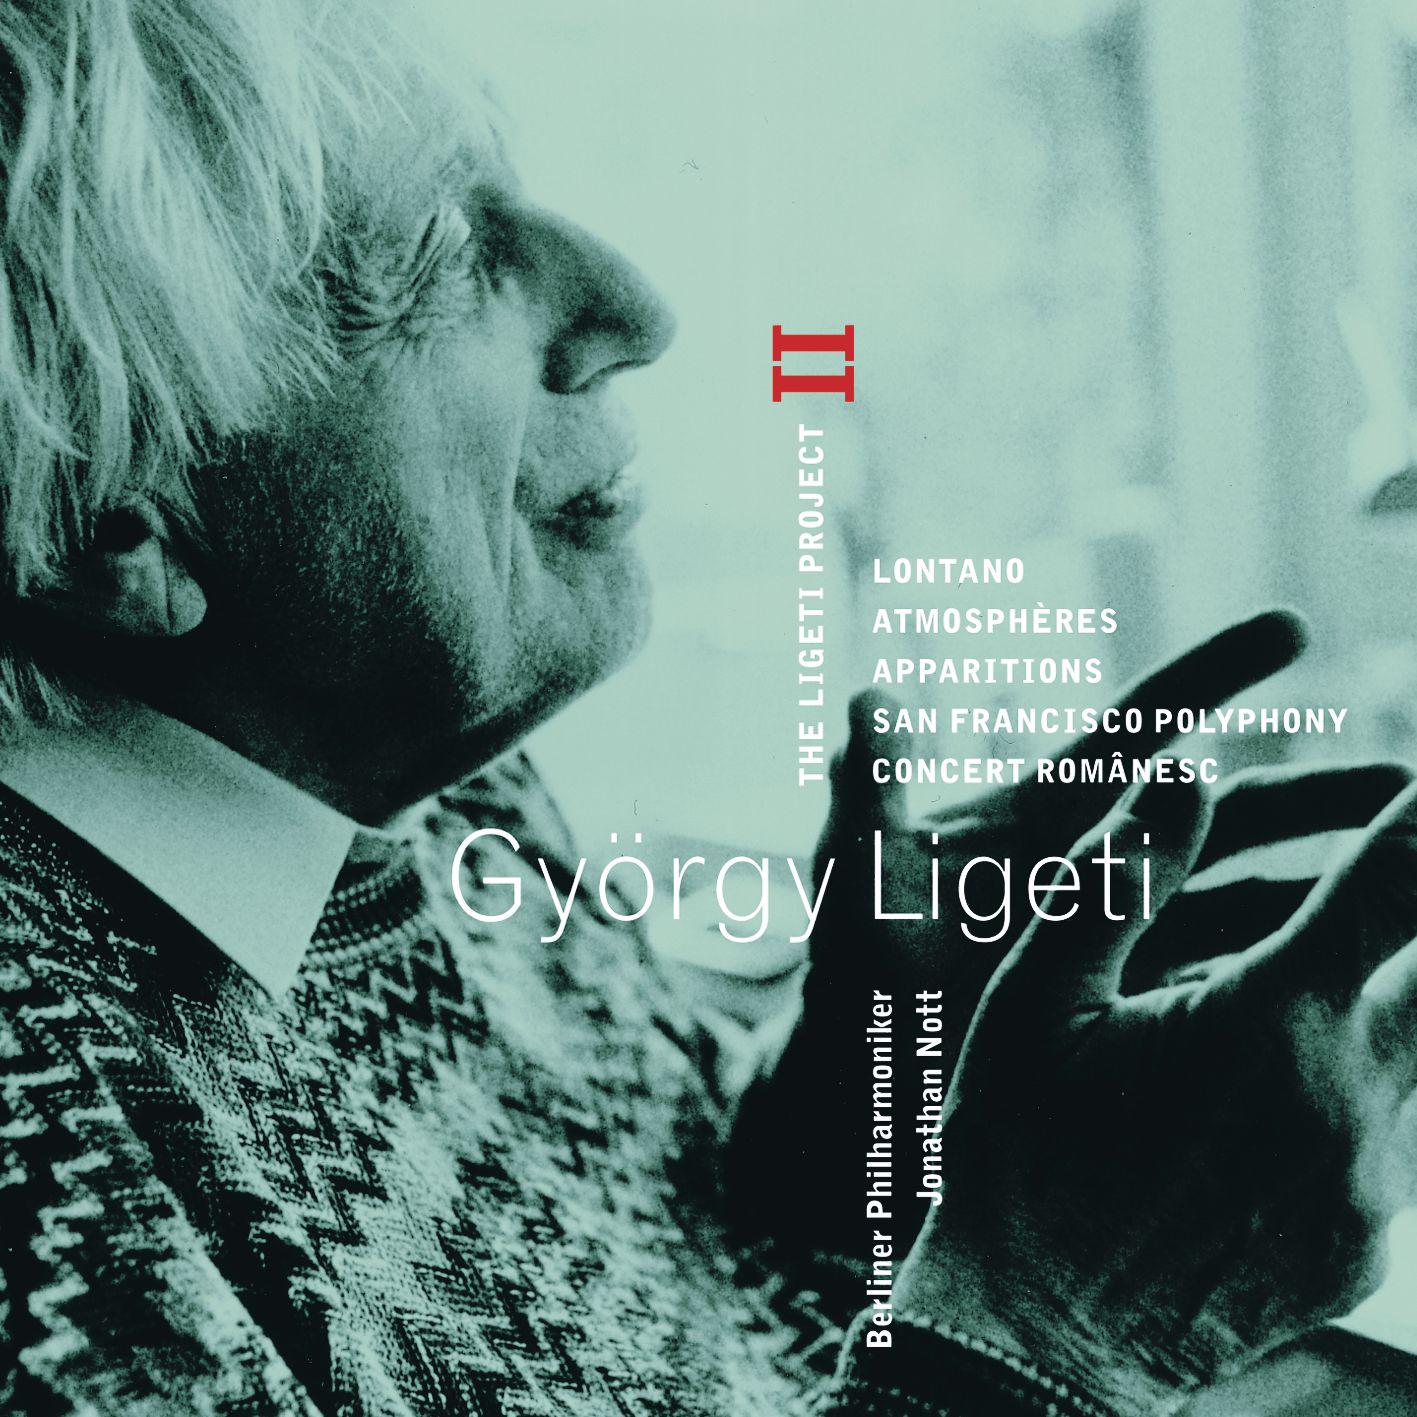 Ligeti : Project Vol. 2  Lontano, Atmosphe res, Apparitions, San Francisco Polyphony  Concert Rom nesc